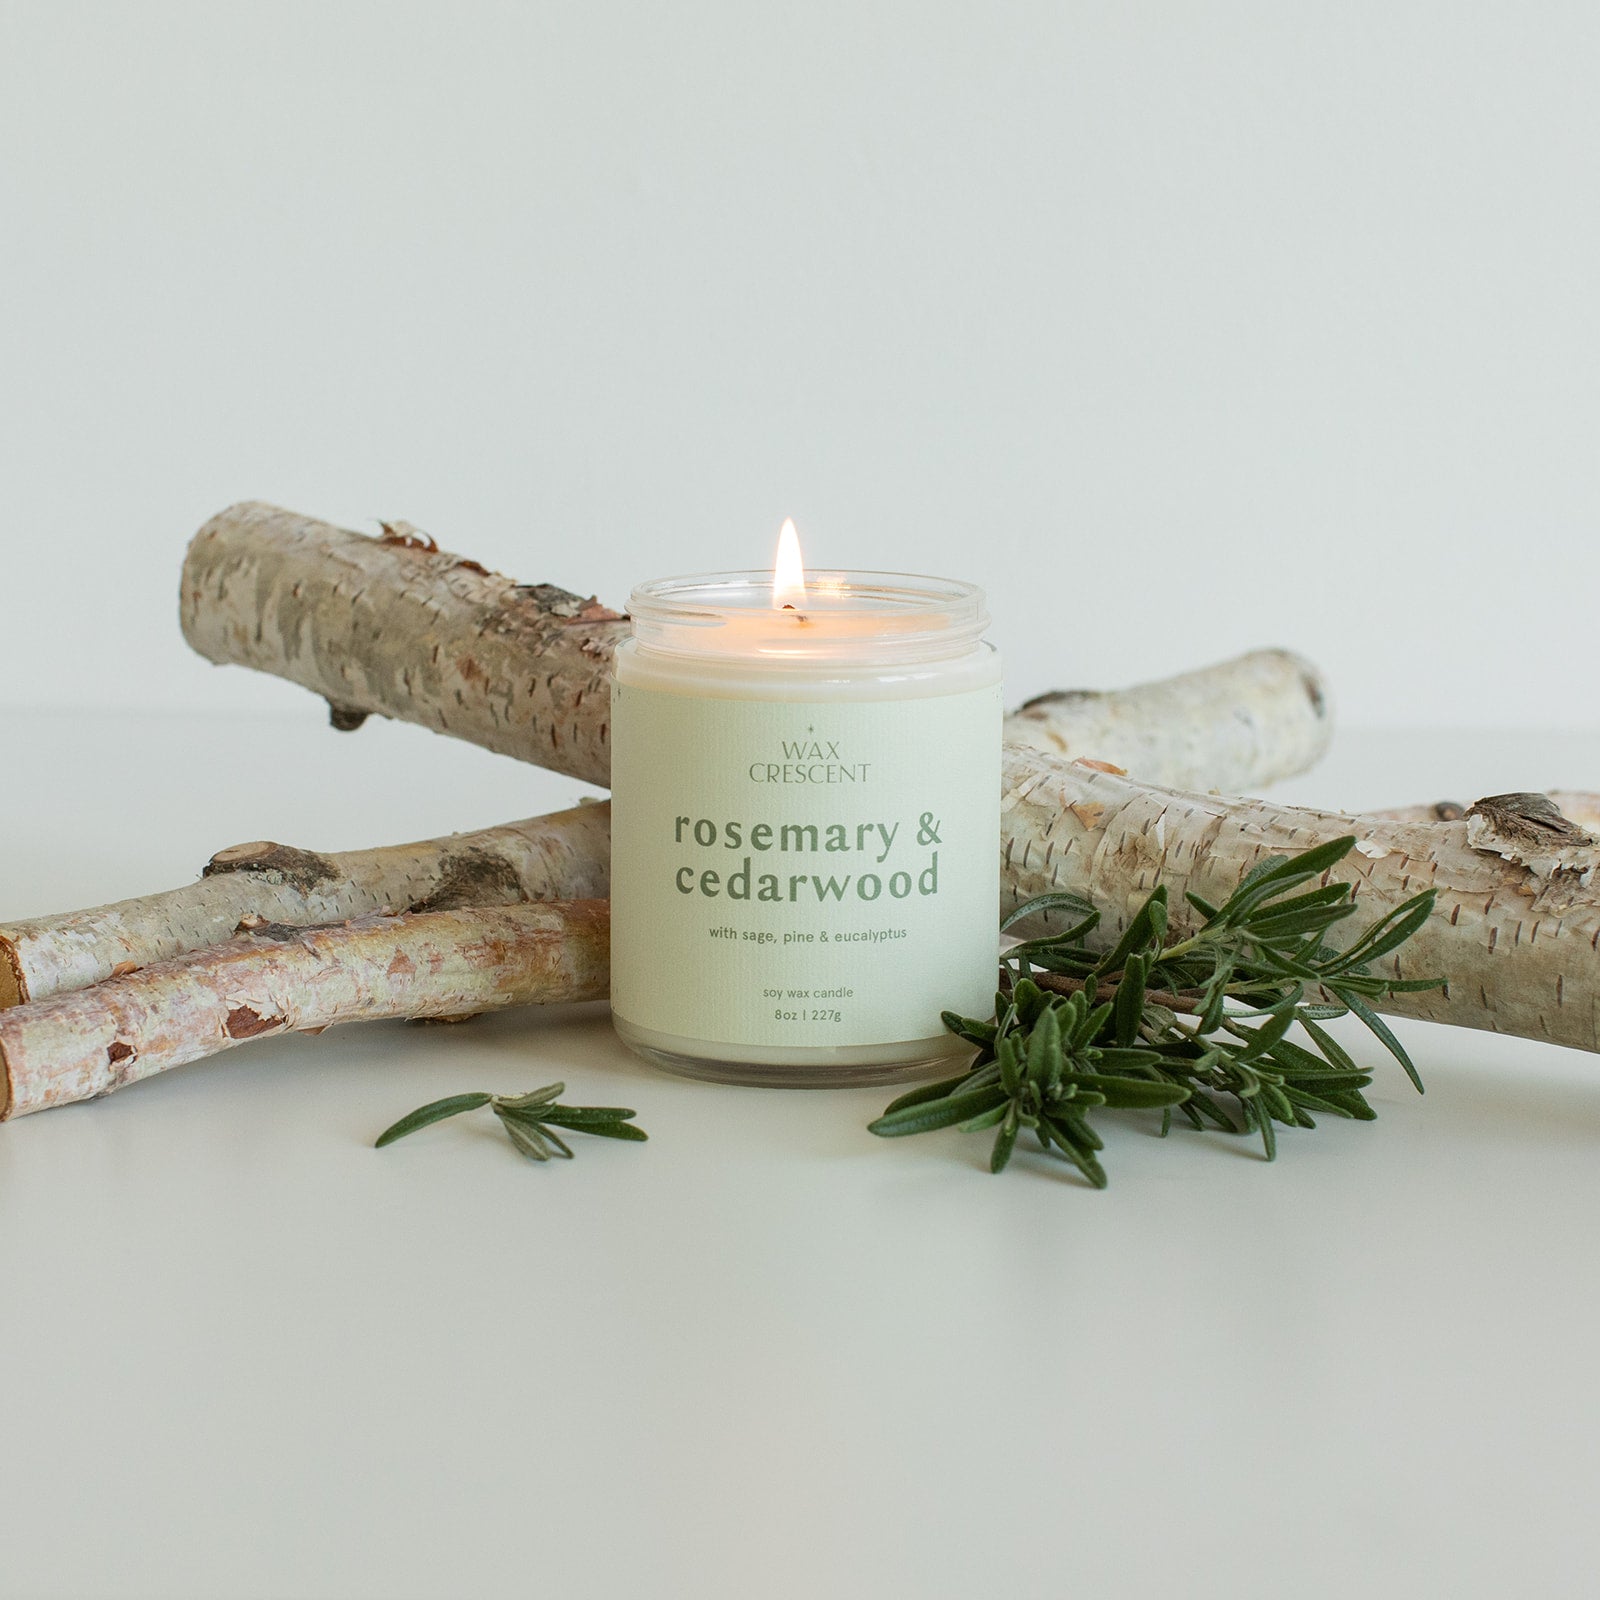 rosemary and cedarwood soy wax candle from Wax Crescent hand poured with non toxic ingredients outside of Denver in Longmont, Colorado. 